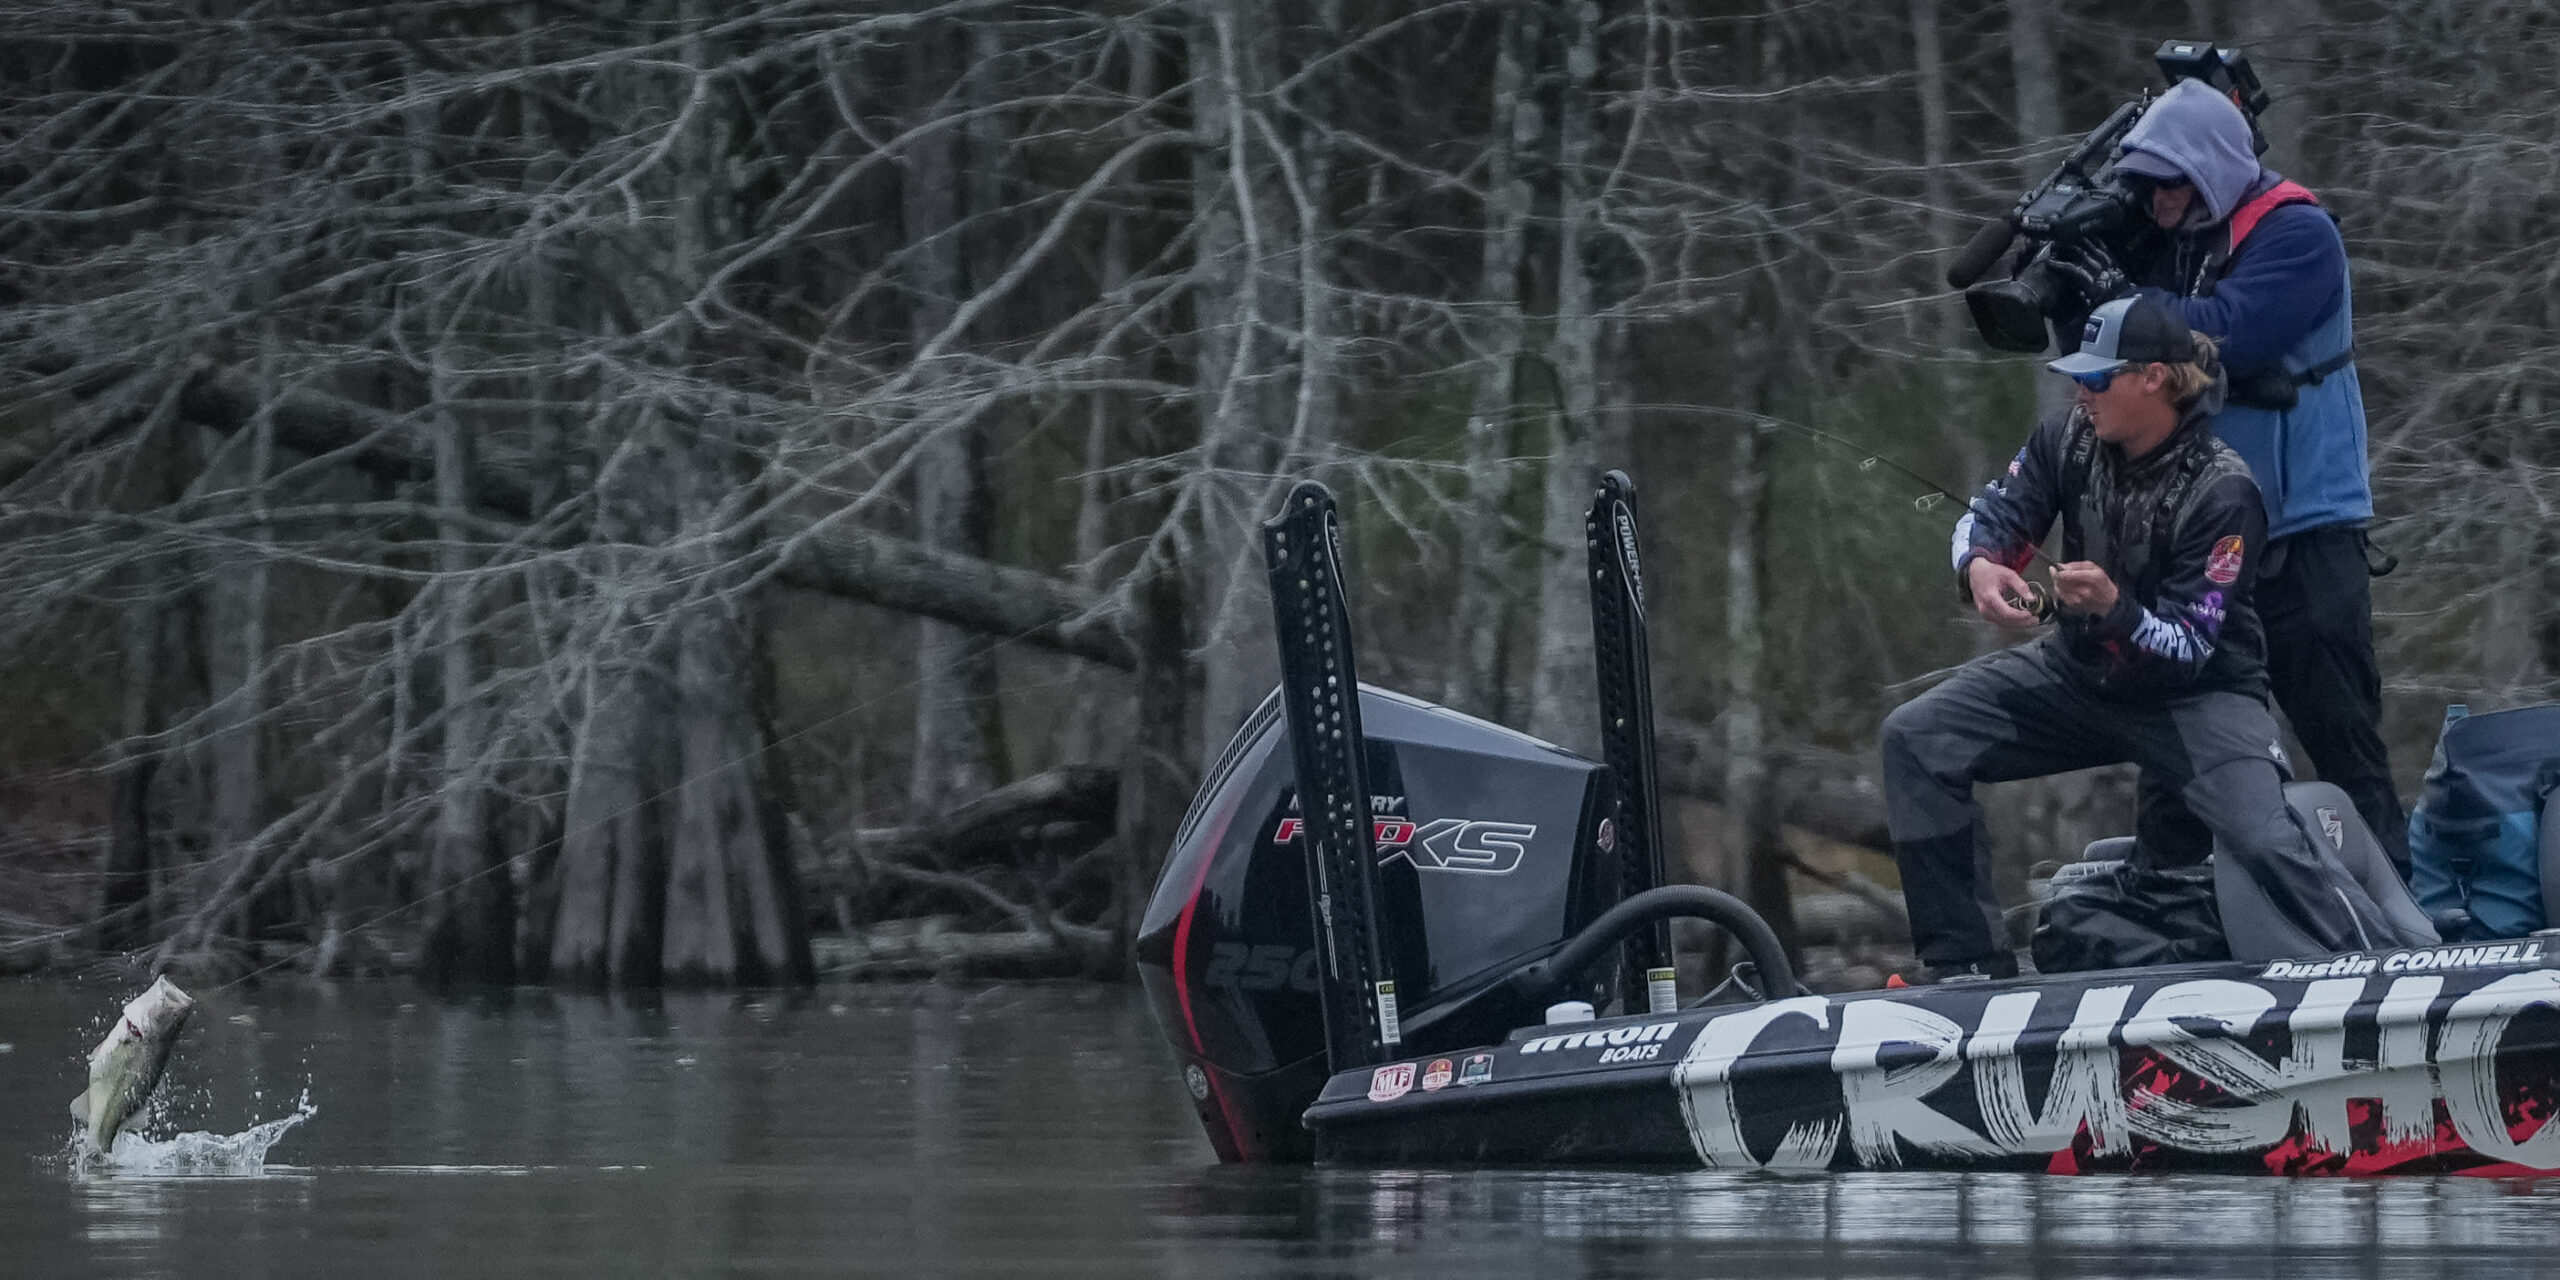 GALLERY: Toledo Bend tango determines Top 10 in final moments of Stage One  Qualifying Round - Major League Fishing